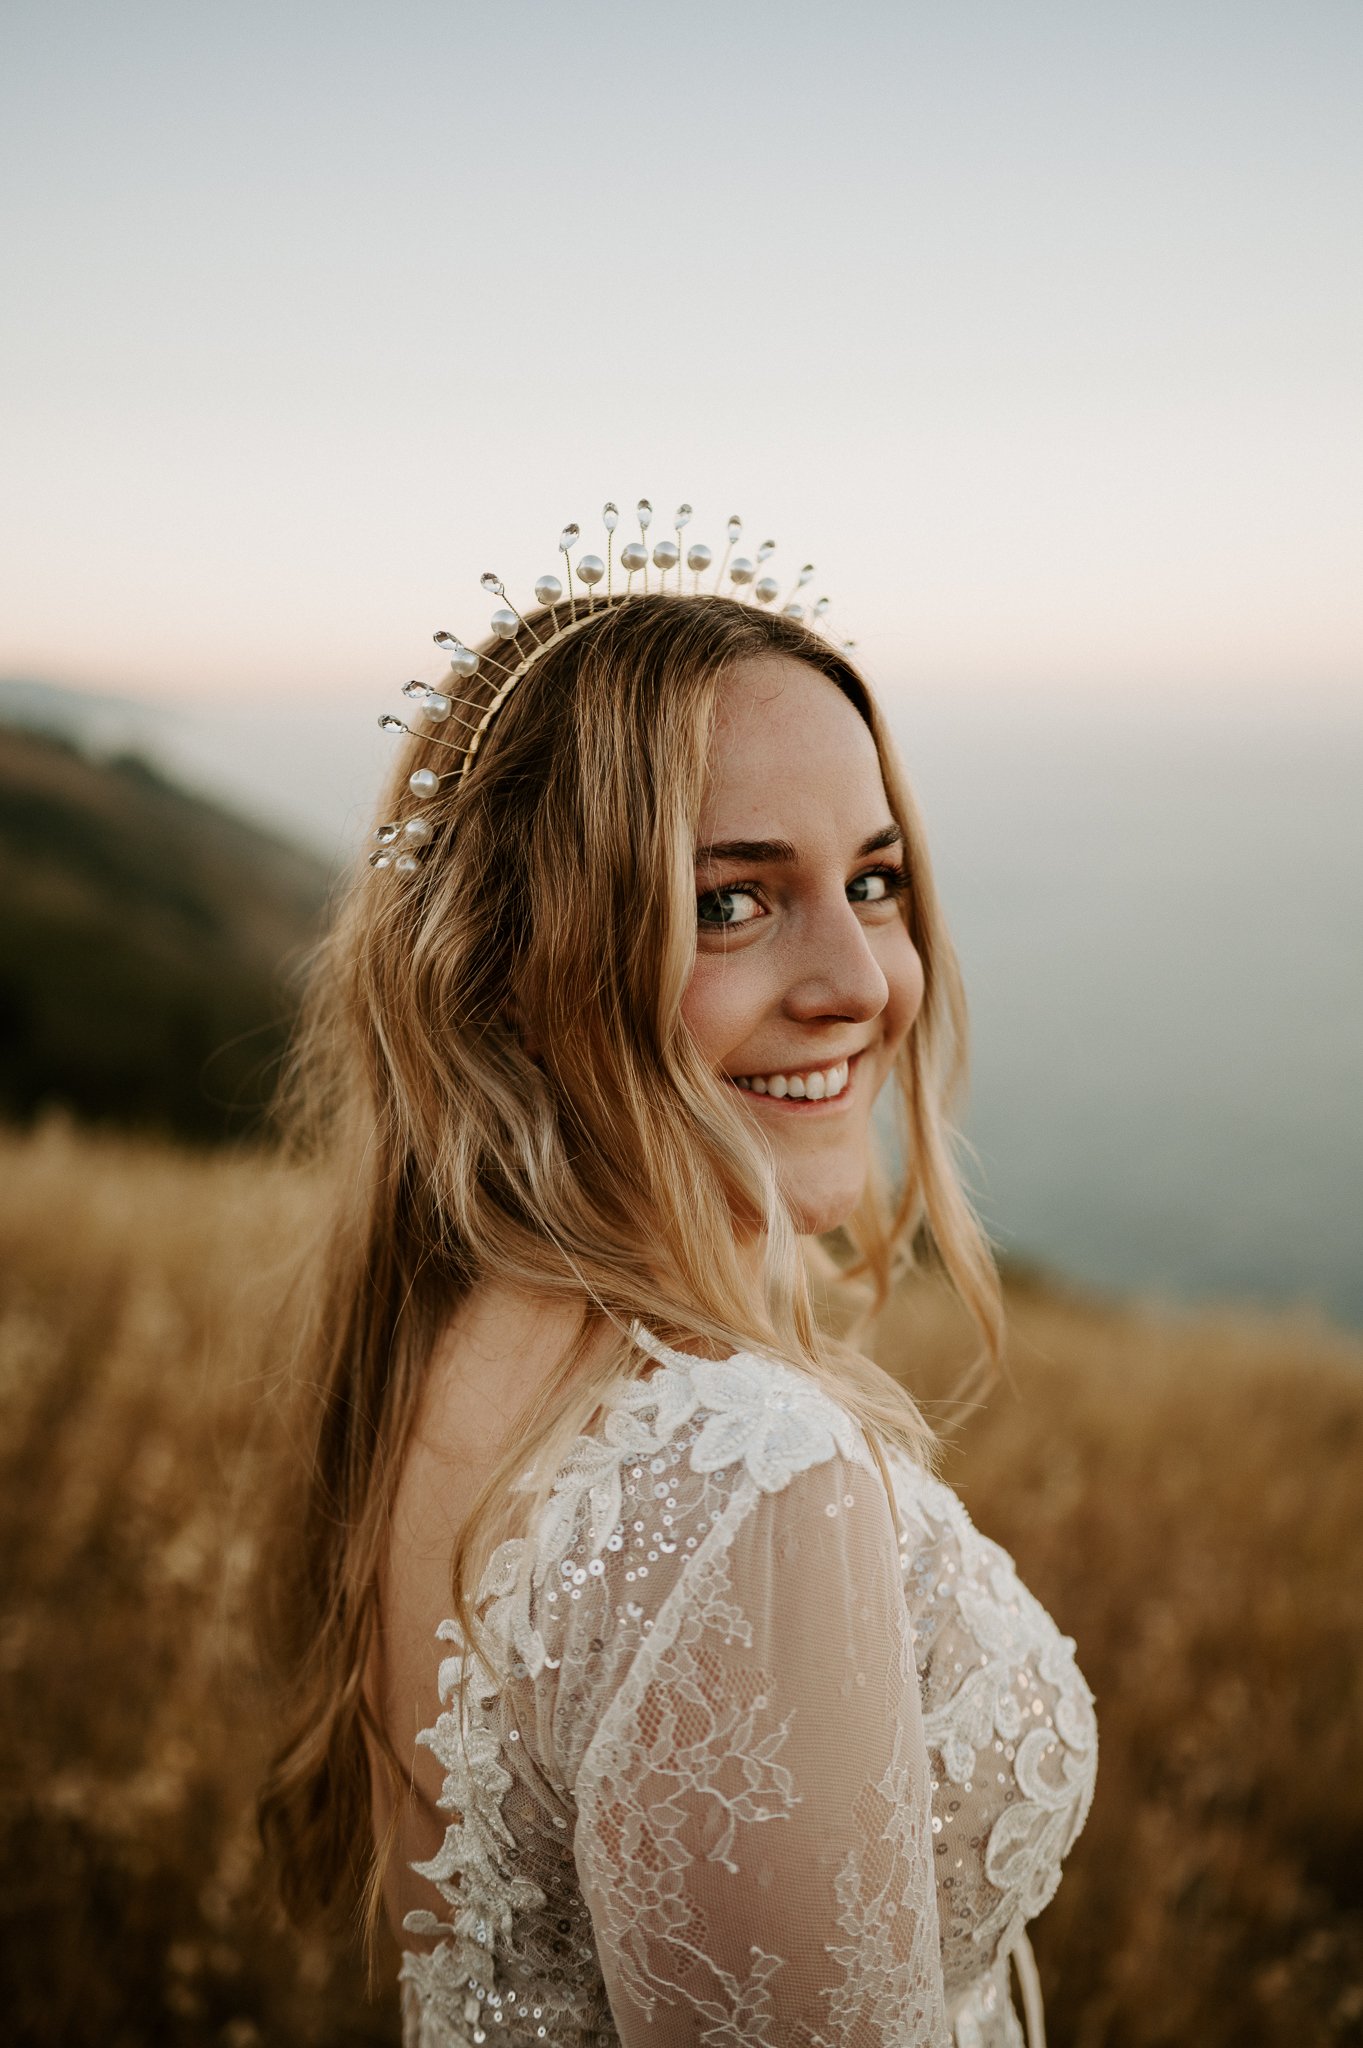 upper brides body with Pacific Ocean in background, bride has a pearl crown on her head